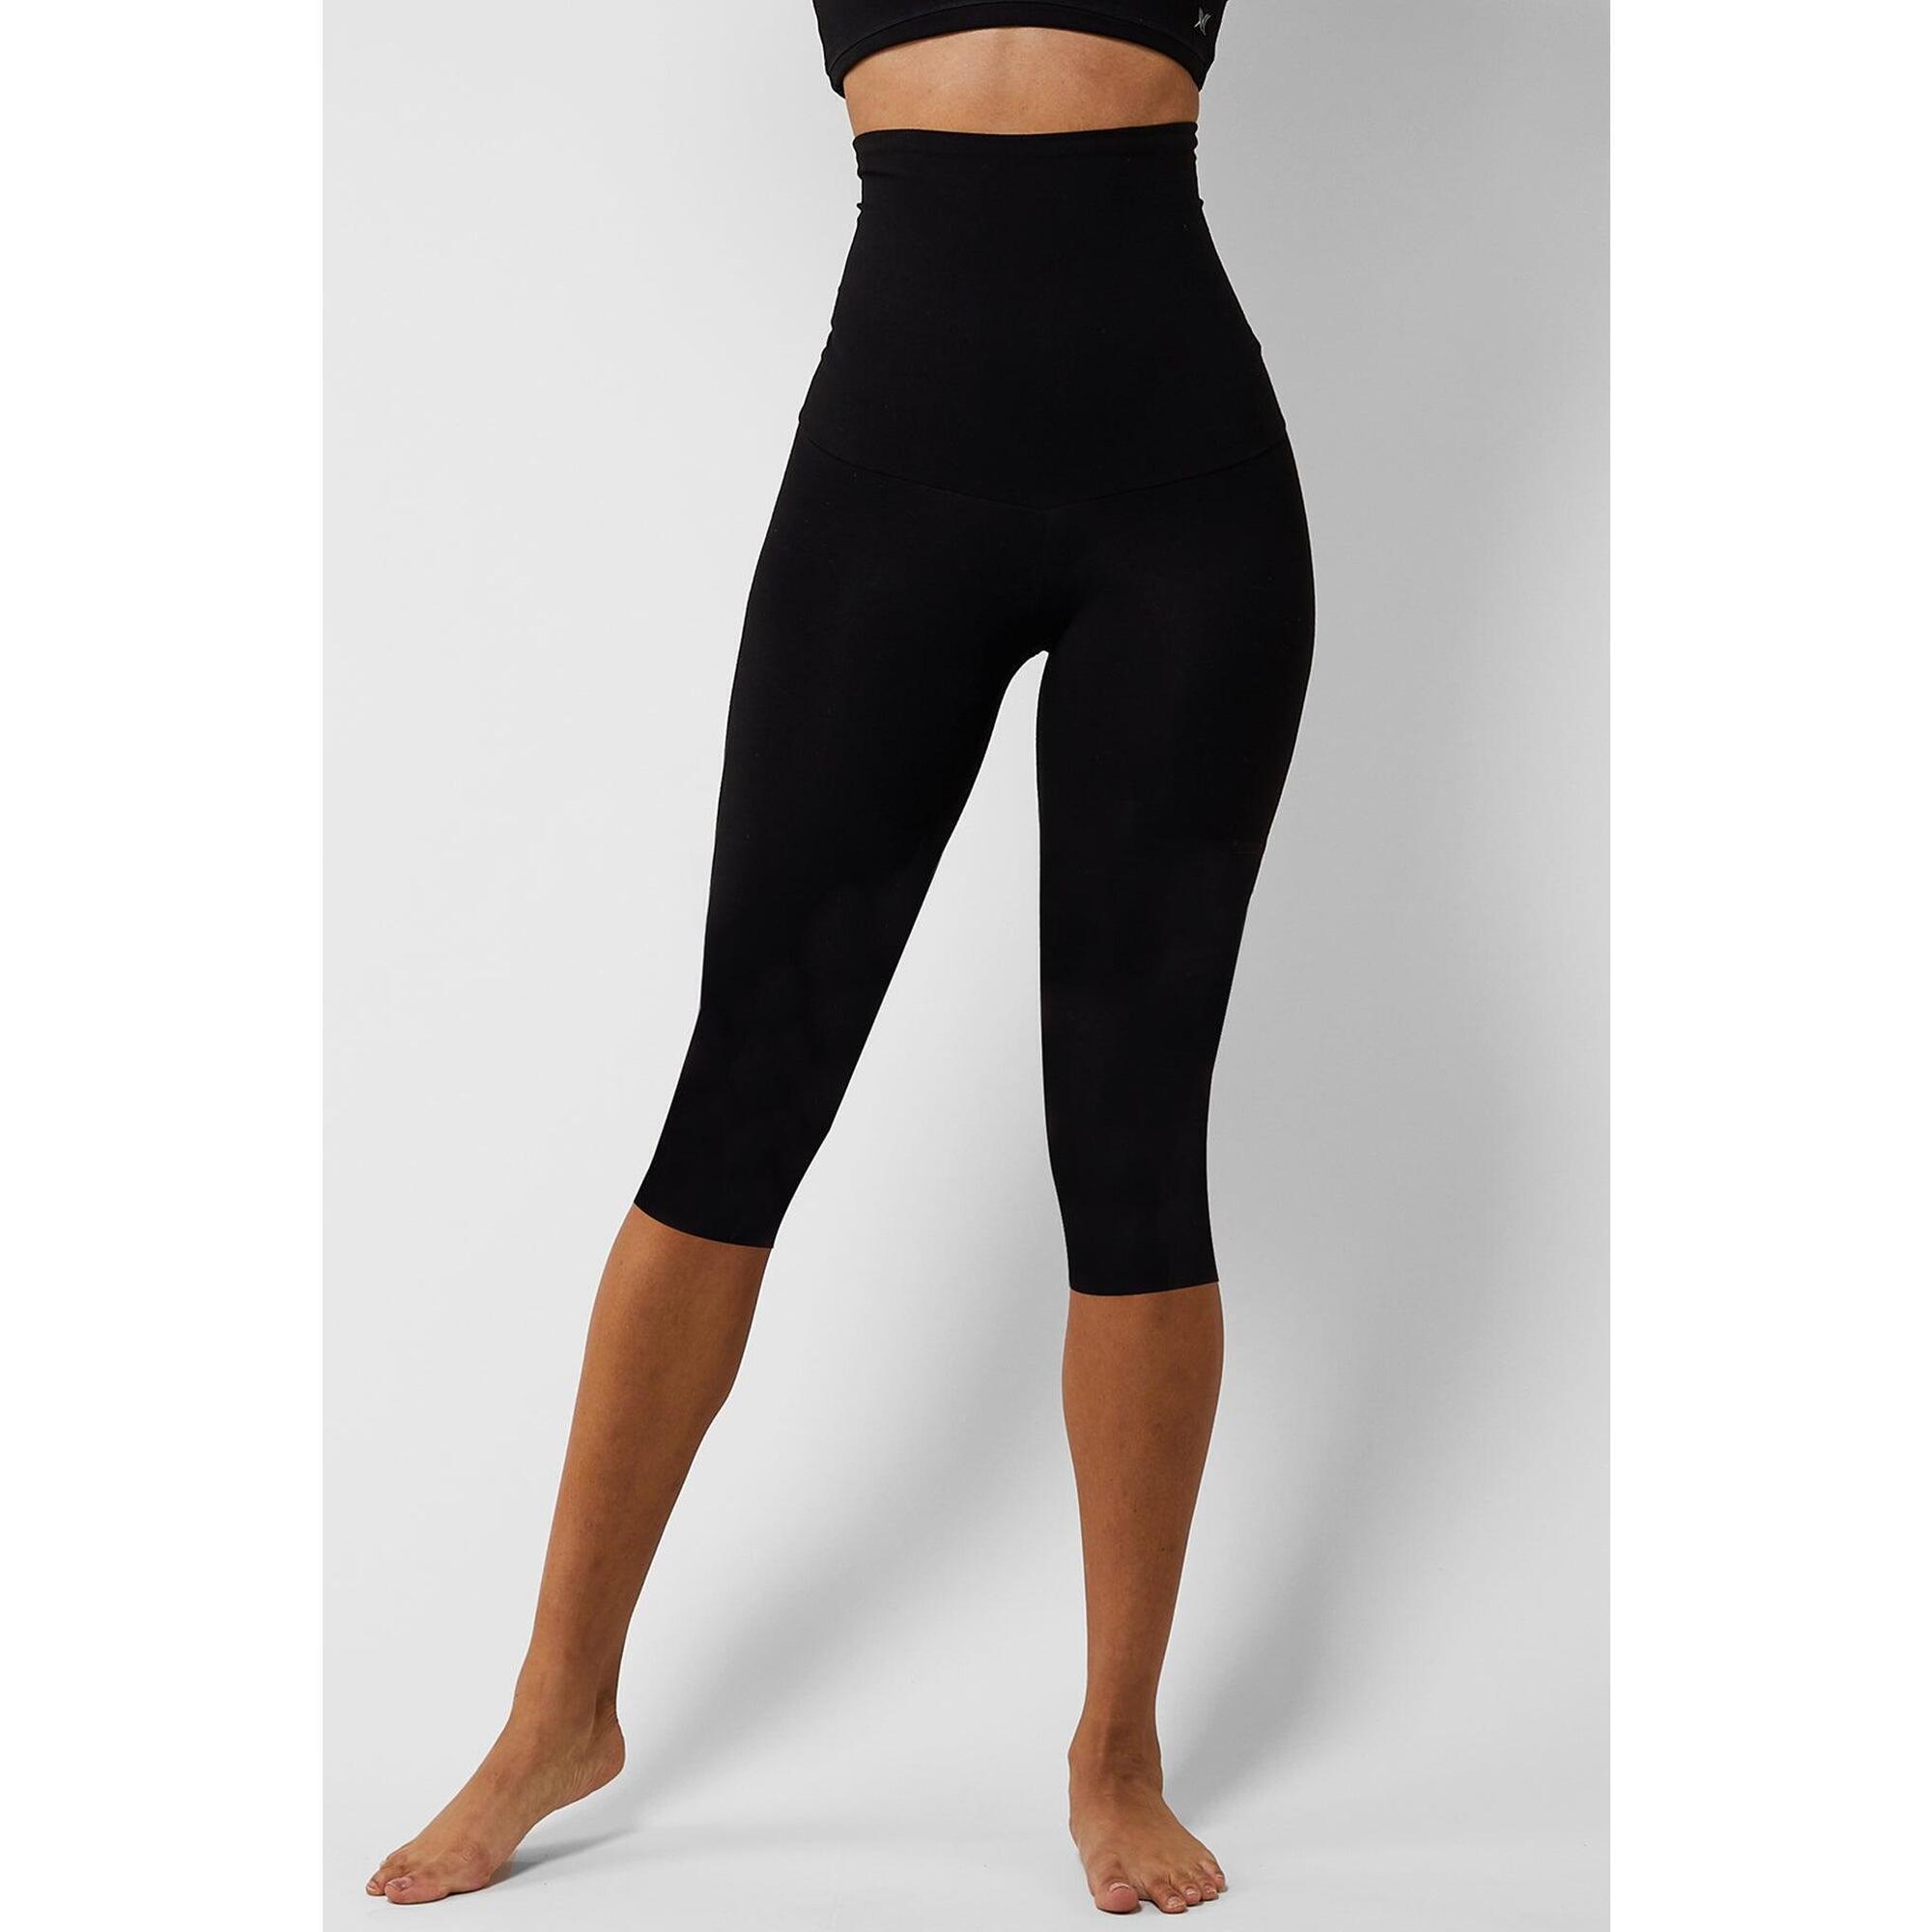 TLC SPORT Extra Strong Compression Capri with High Waisted Tummy Control Black